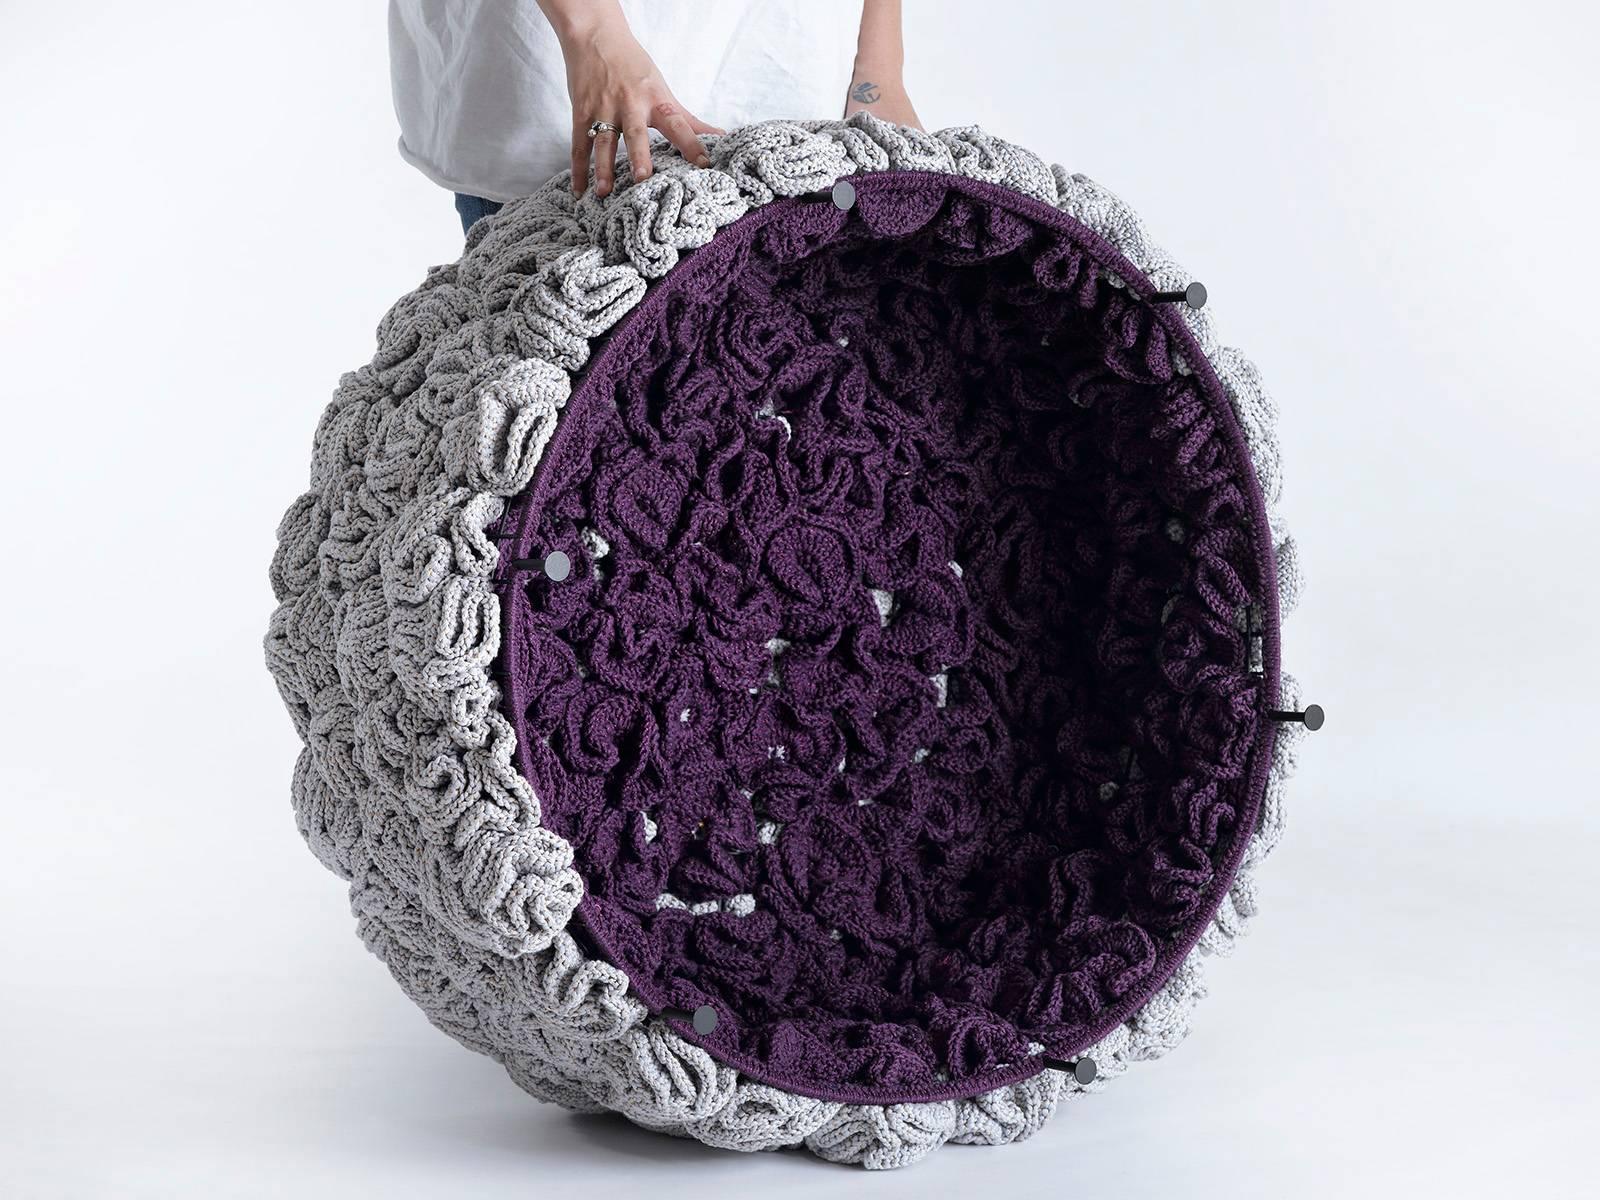 The iota pouf challenges the classic upholstery technique and offers a new concept. The luscious, soft look and feel conceals a metal construction which gives it stiffness. The textile cover of the pouf is composed of dozens of hand knit flower-